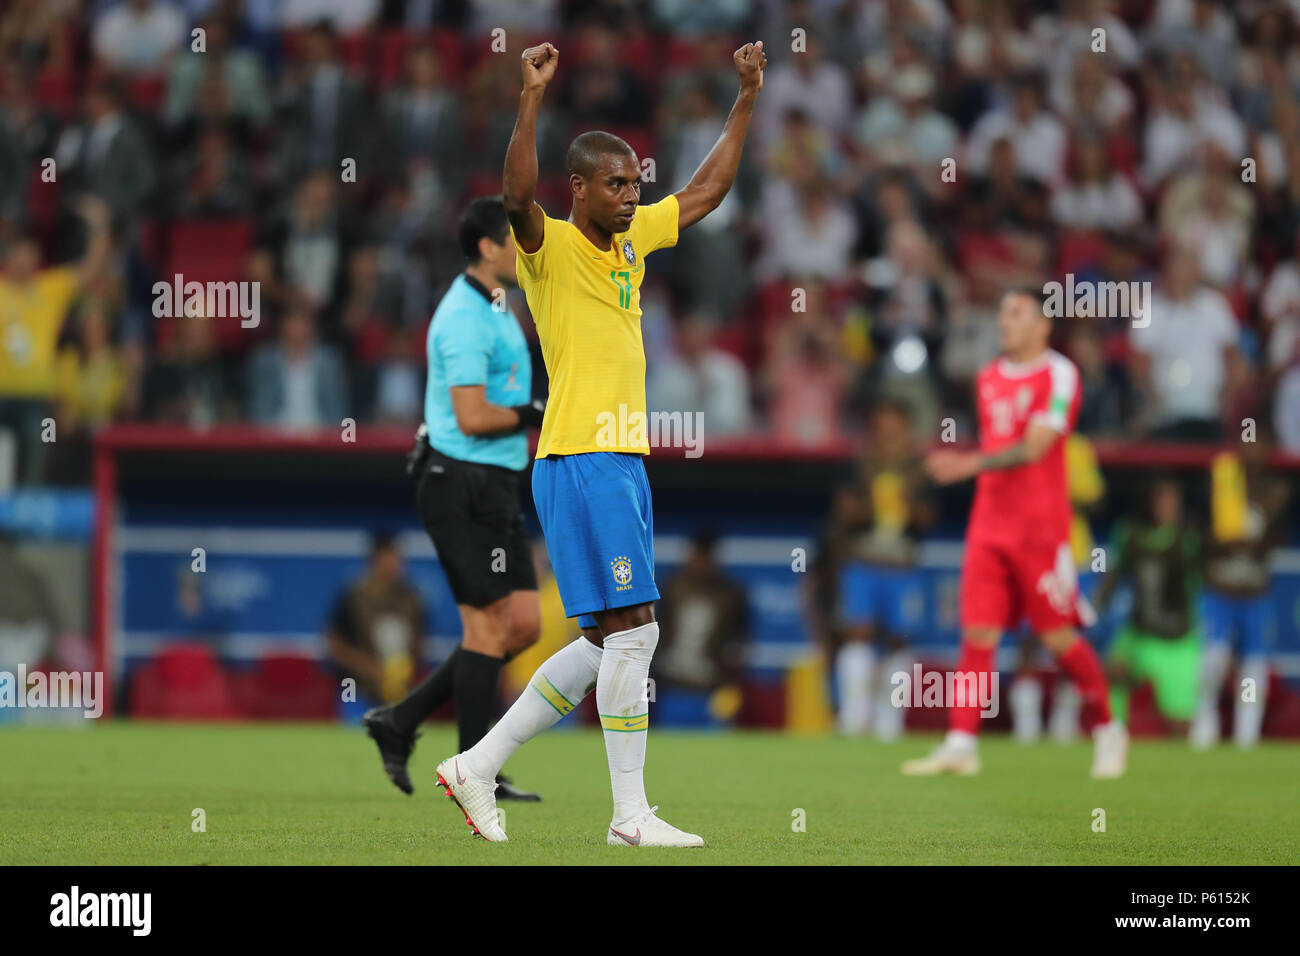 Fernandinho BRAZIL SERBIA V BRAZIL, 2018 FIFA WORLD CUP RUSSIA 27 June 2018 GBC8980 Serbia v Brazil 2018 FIFA World Cup Russia Spartak Stadium Moscow STRICTLY EDITORIAL USE ONLY. If The Player/Players Depicted In This Image Is/Are Playing For An English Club Or The England National Team. Then This Image May Only Be Used For Editorial Purposes. No Commercial Use. The Following Usages Are Also Restricted EVEN IF IN AN EDITORIAL CONTEXT: Use in conjuction with, or part of, any unauthorized audio, video, data, fixture lists, club/league logos, Betting, Games or any 'live' servic Stock Photo